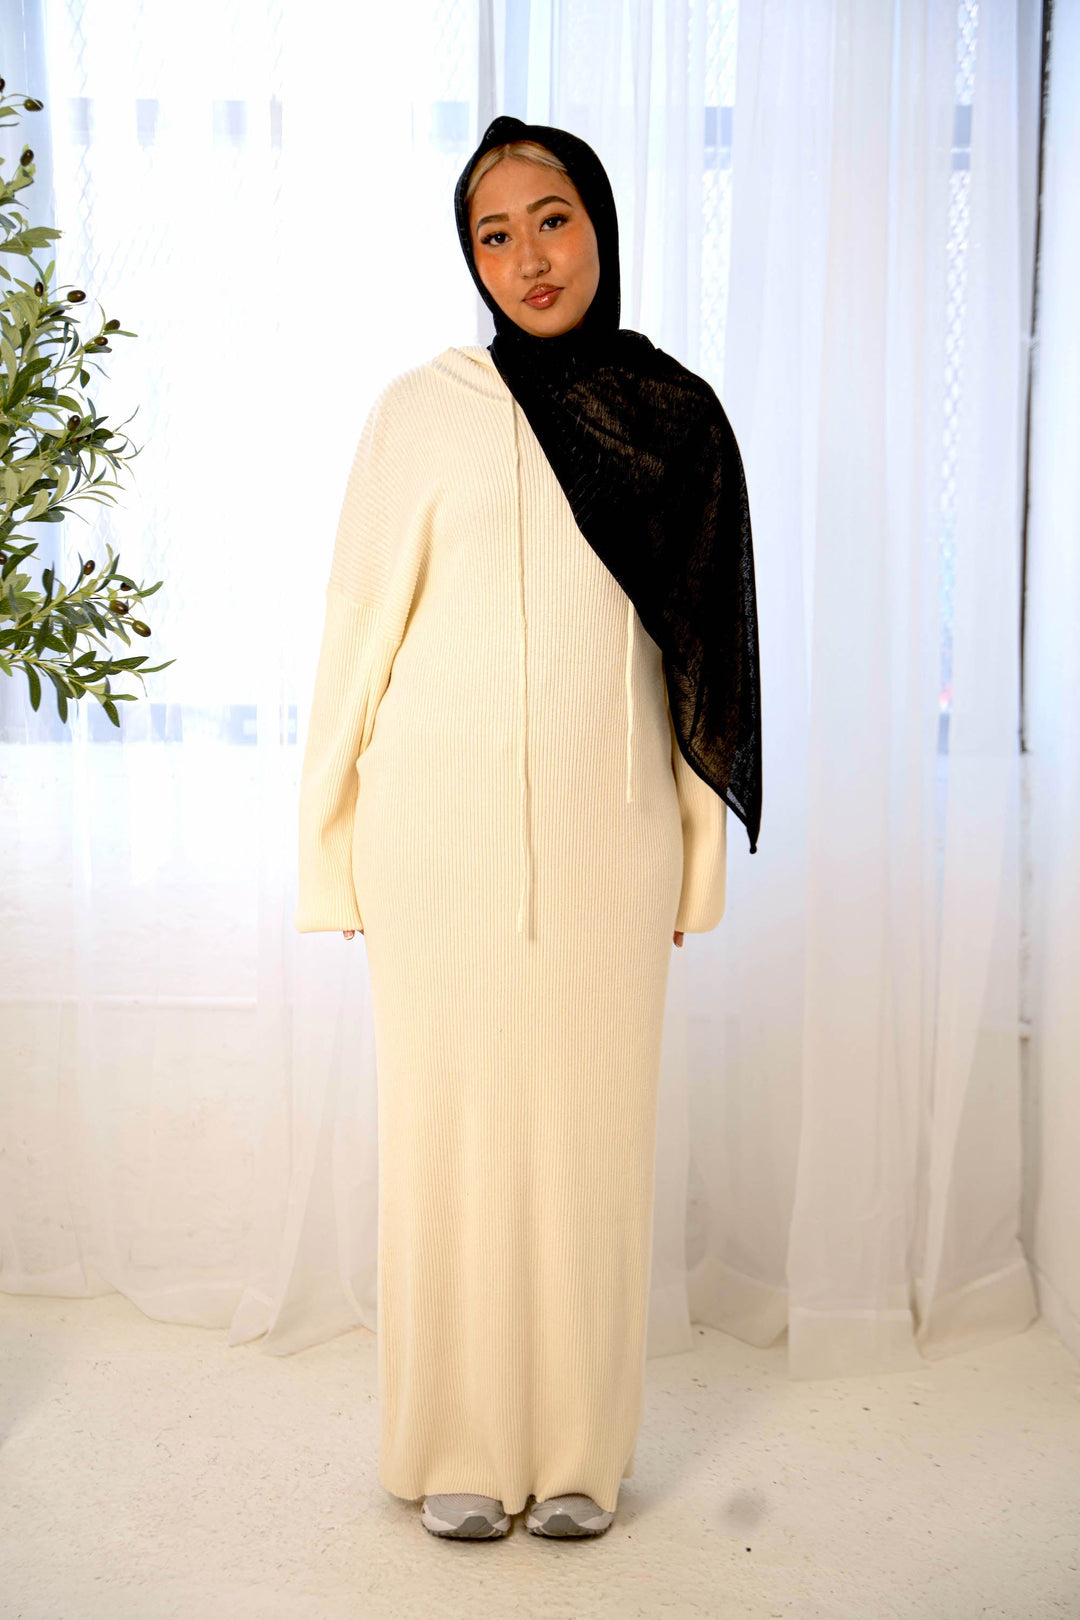 a woman standing in front of a window wearing a white dress and black shawl